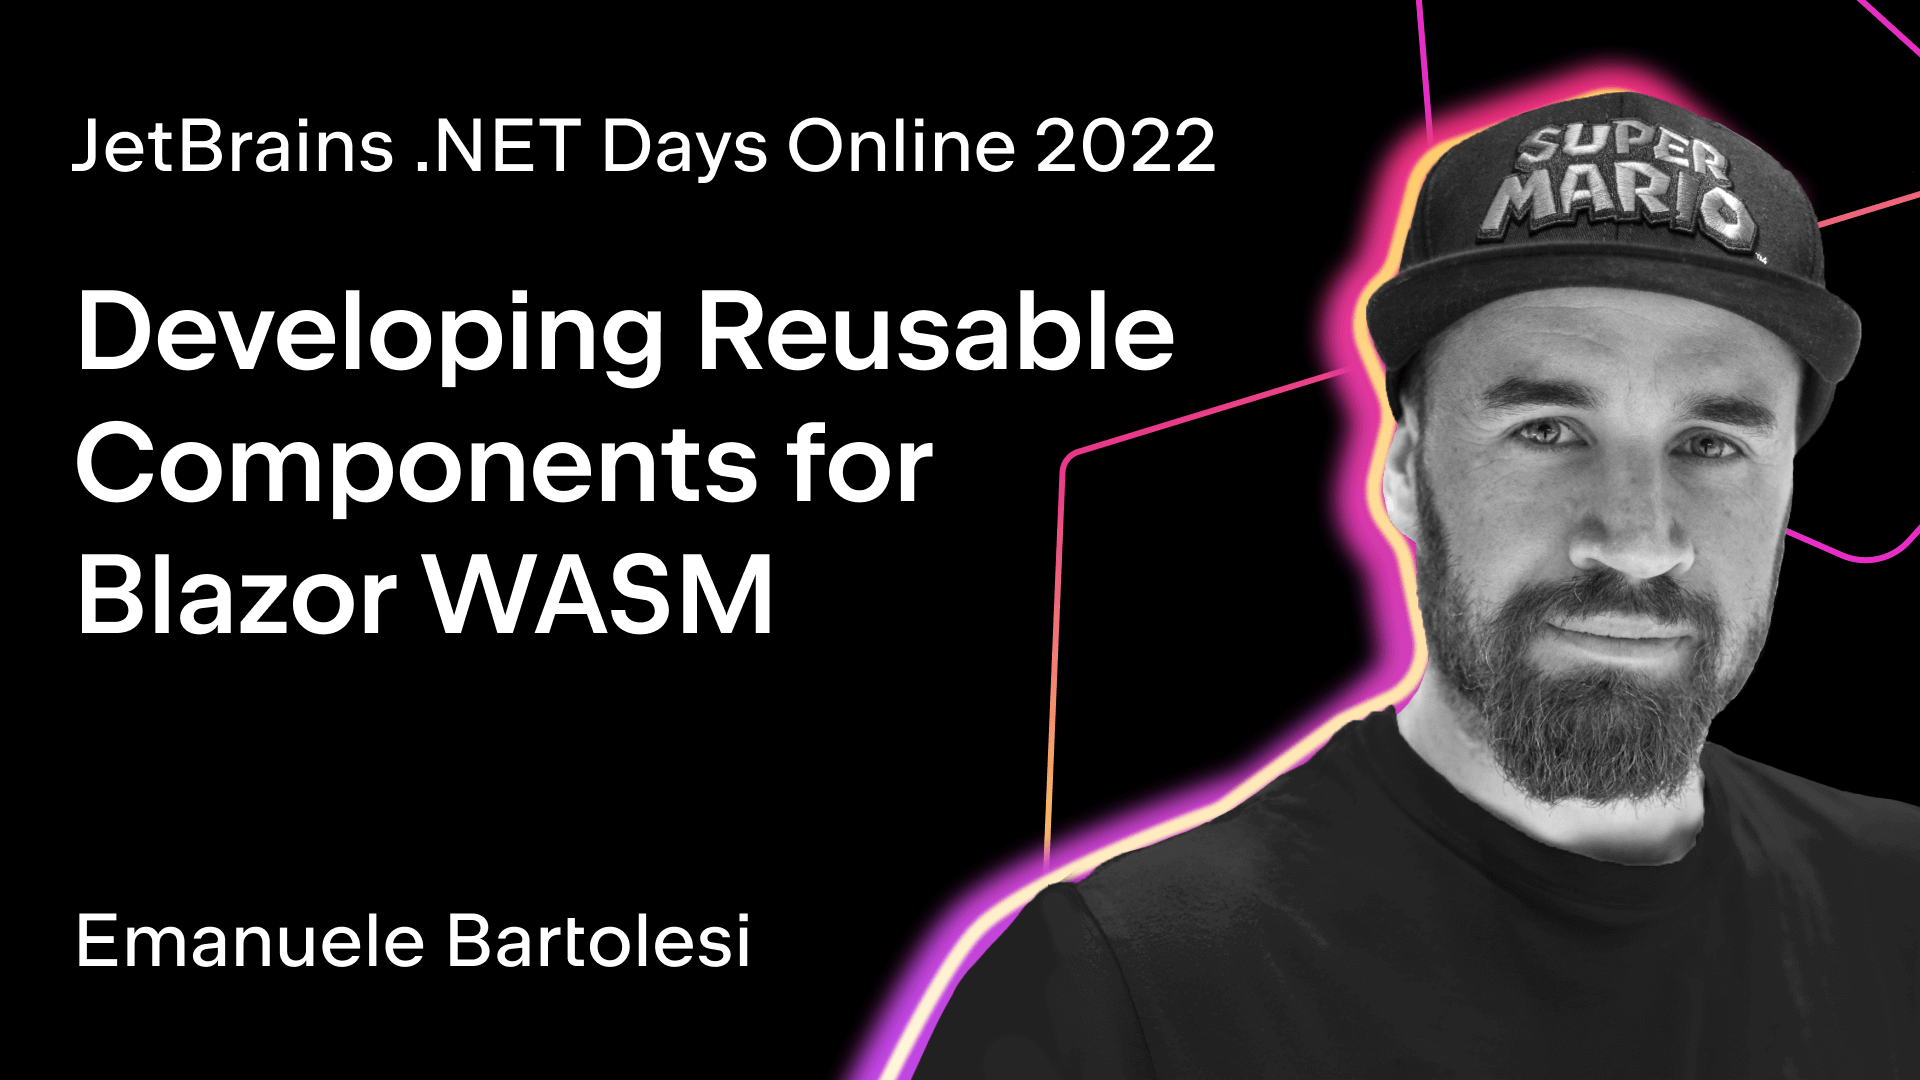 Developing reusable components for Blazor WASM